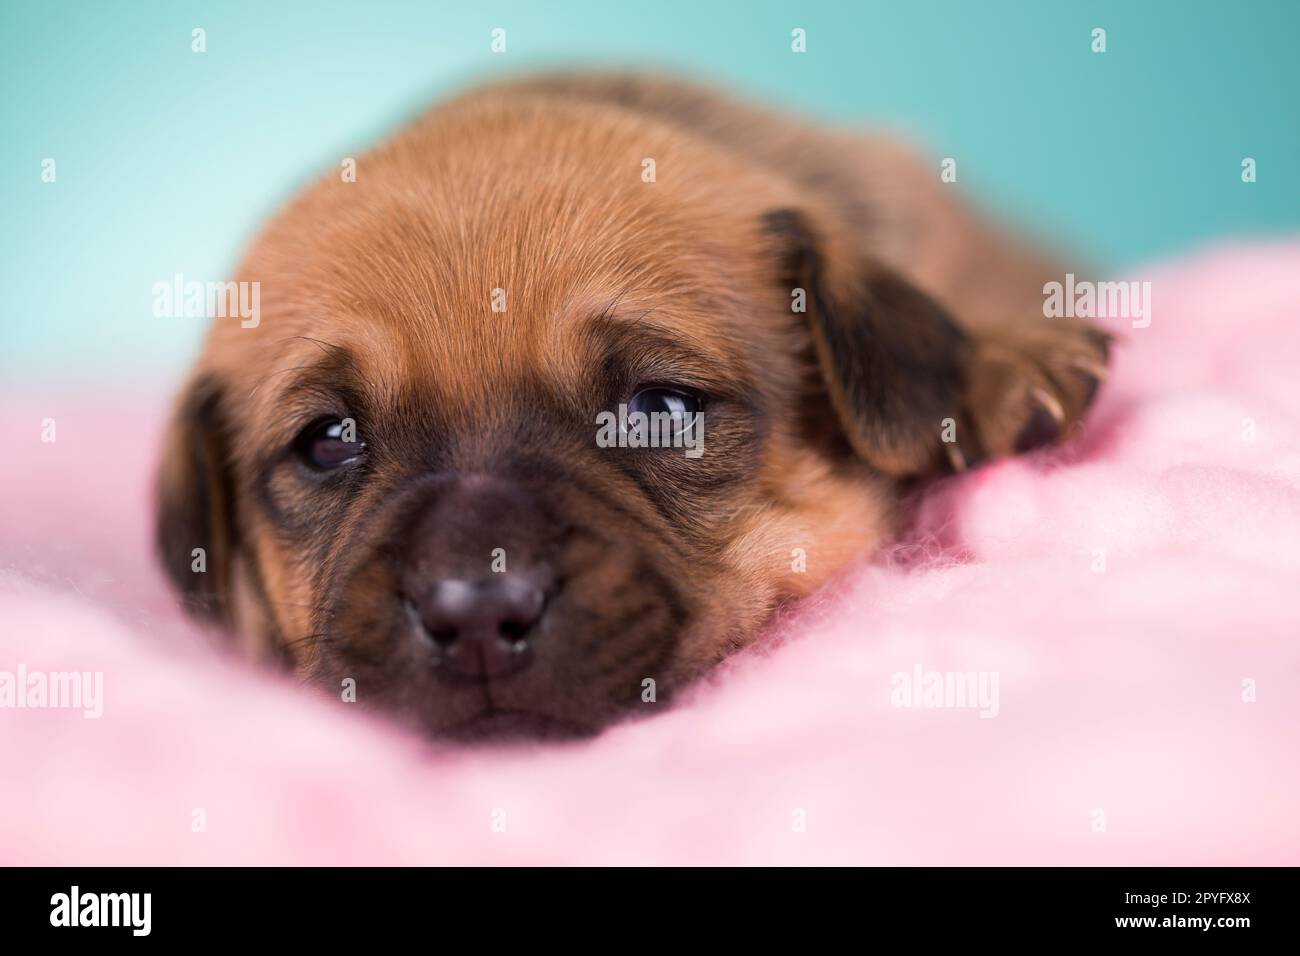 Sleeping dog in a on a blanket Stock Photo